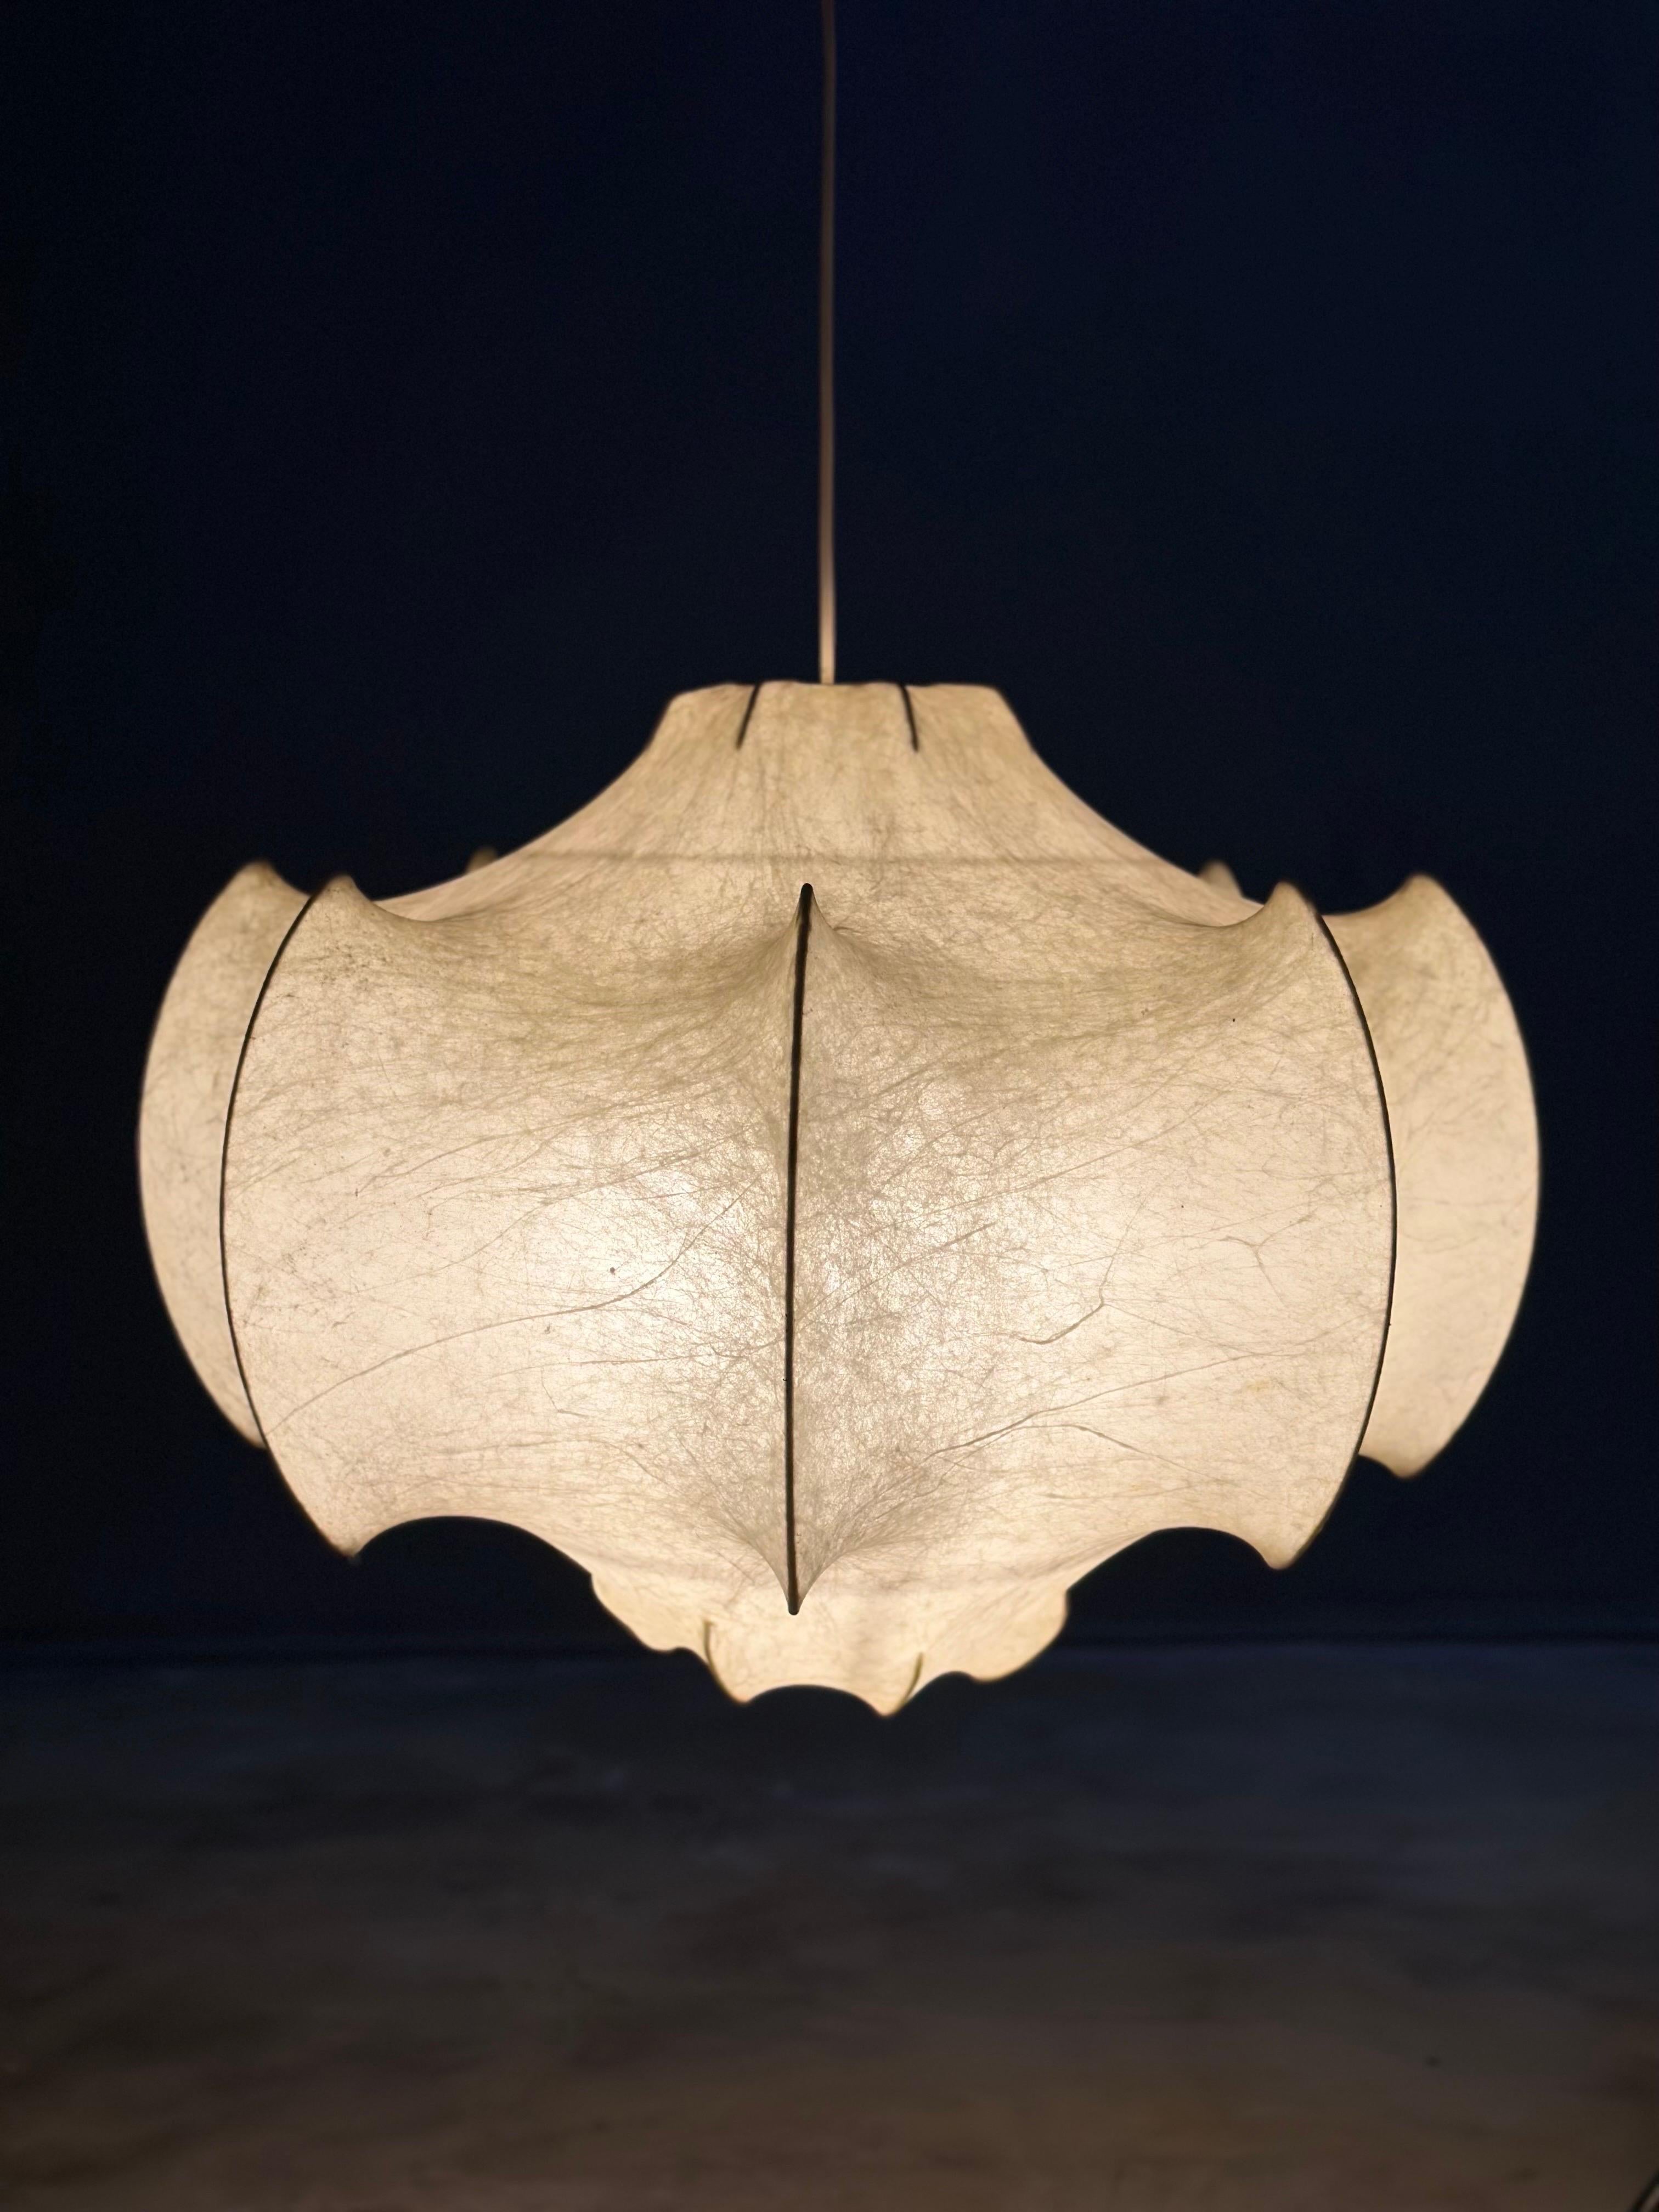 'Viscontea' Ceiling Lamp by Achille and Pier Giacomo Castiglioni for Flos, 1960s

This stunning piece, crafted in the 1960s, is a true masterpiece of design – blending modern shapes with an organic, almost whimsical sensibility that will add an